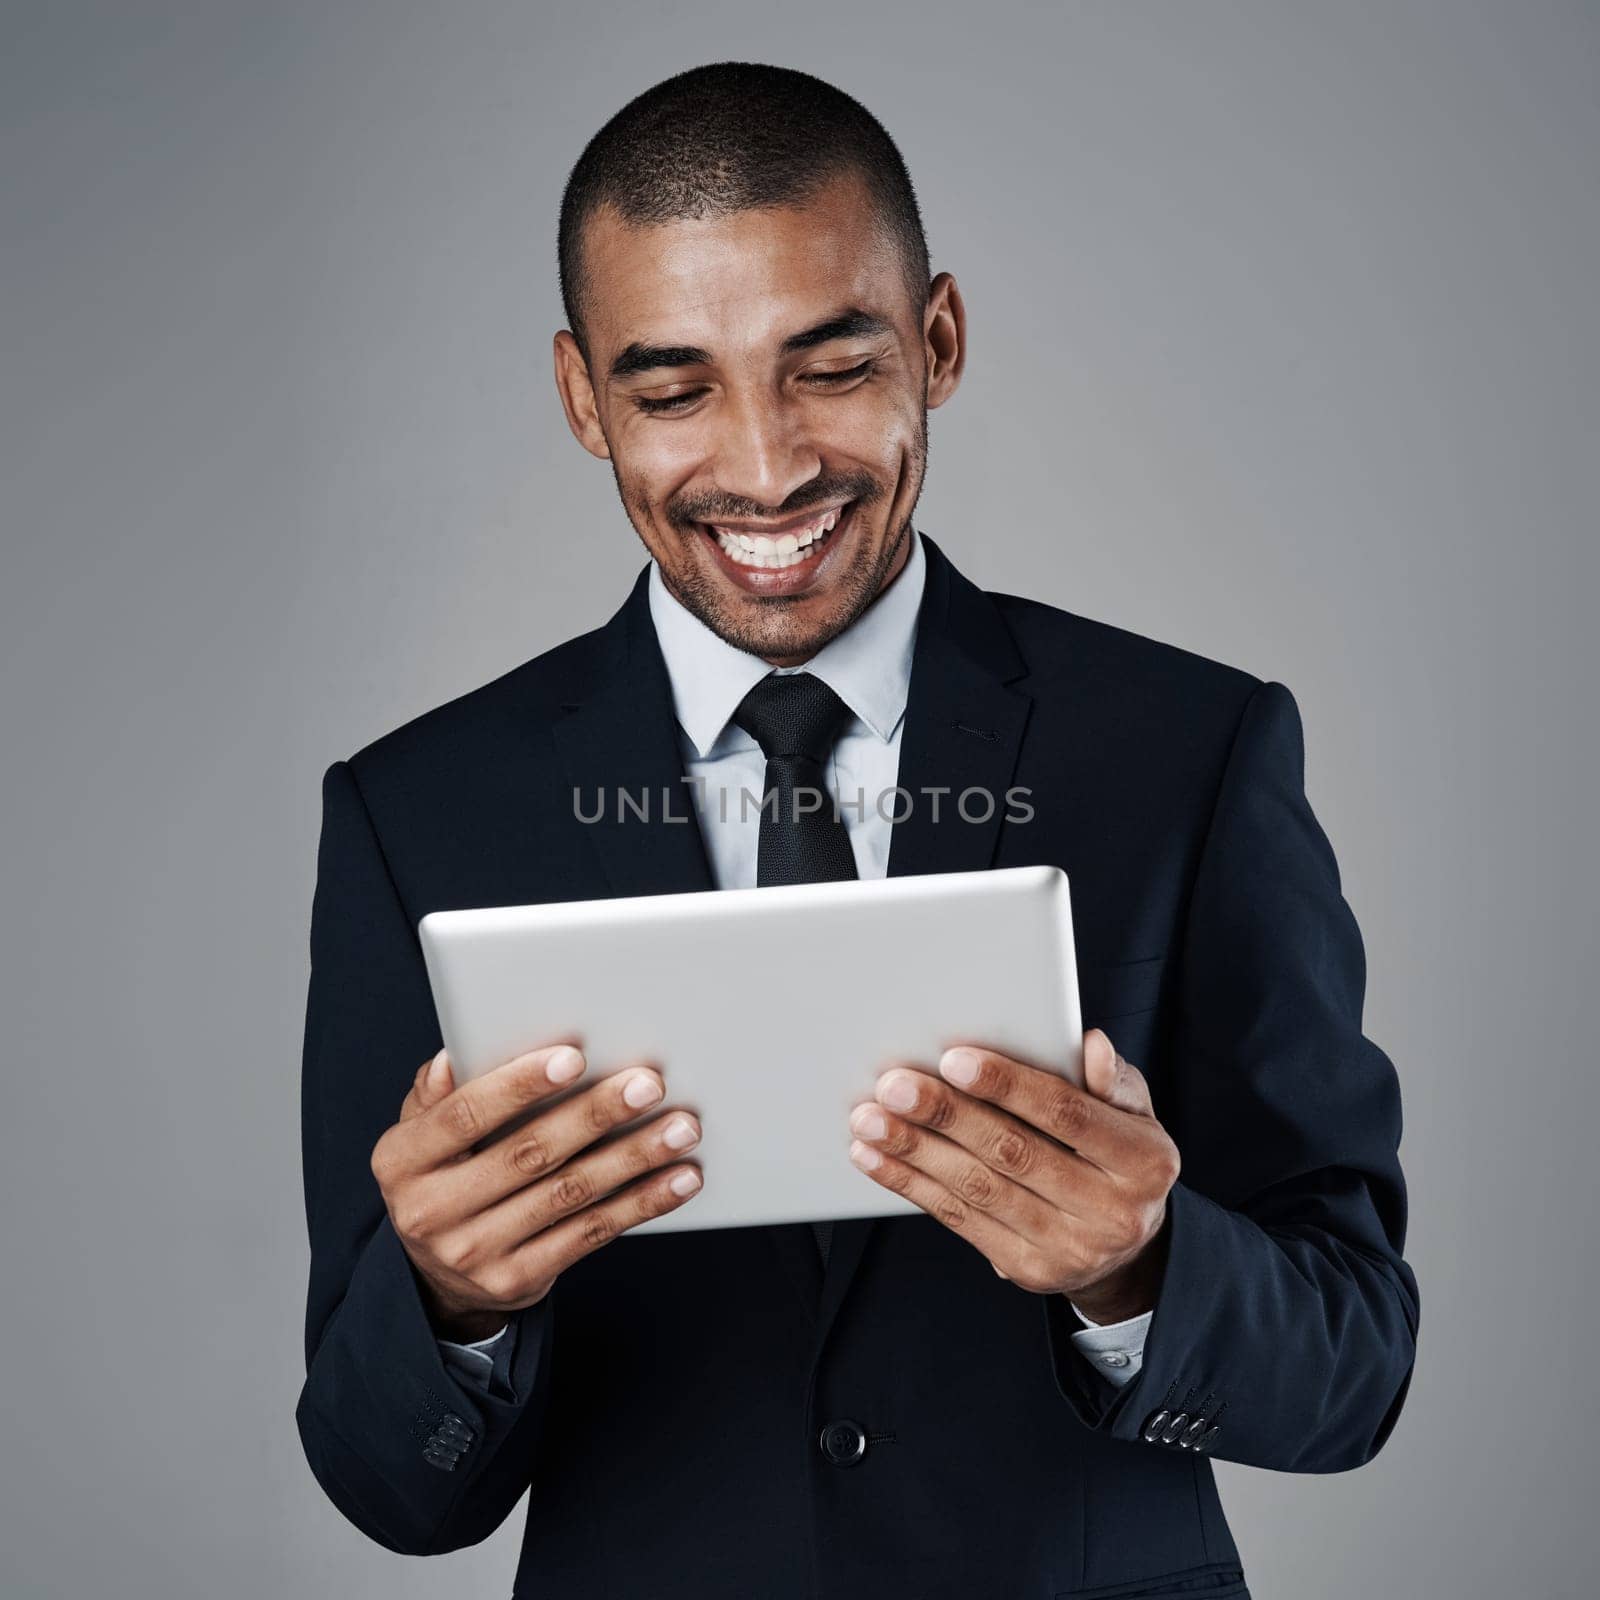 Smart people work smartly. Studio shot of a corporate businessman using a digital tablet against a grey background